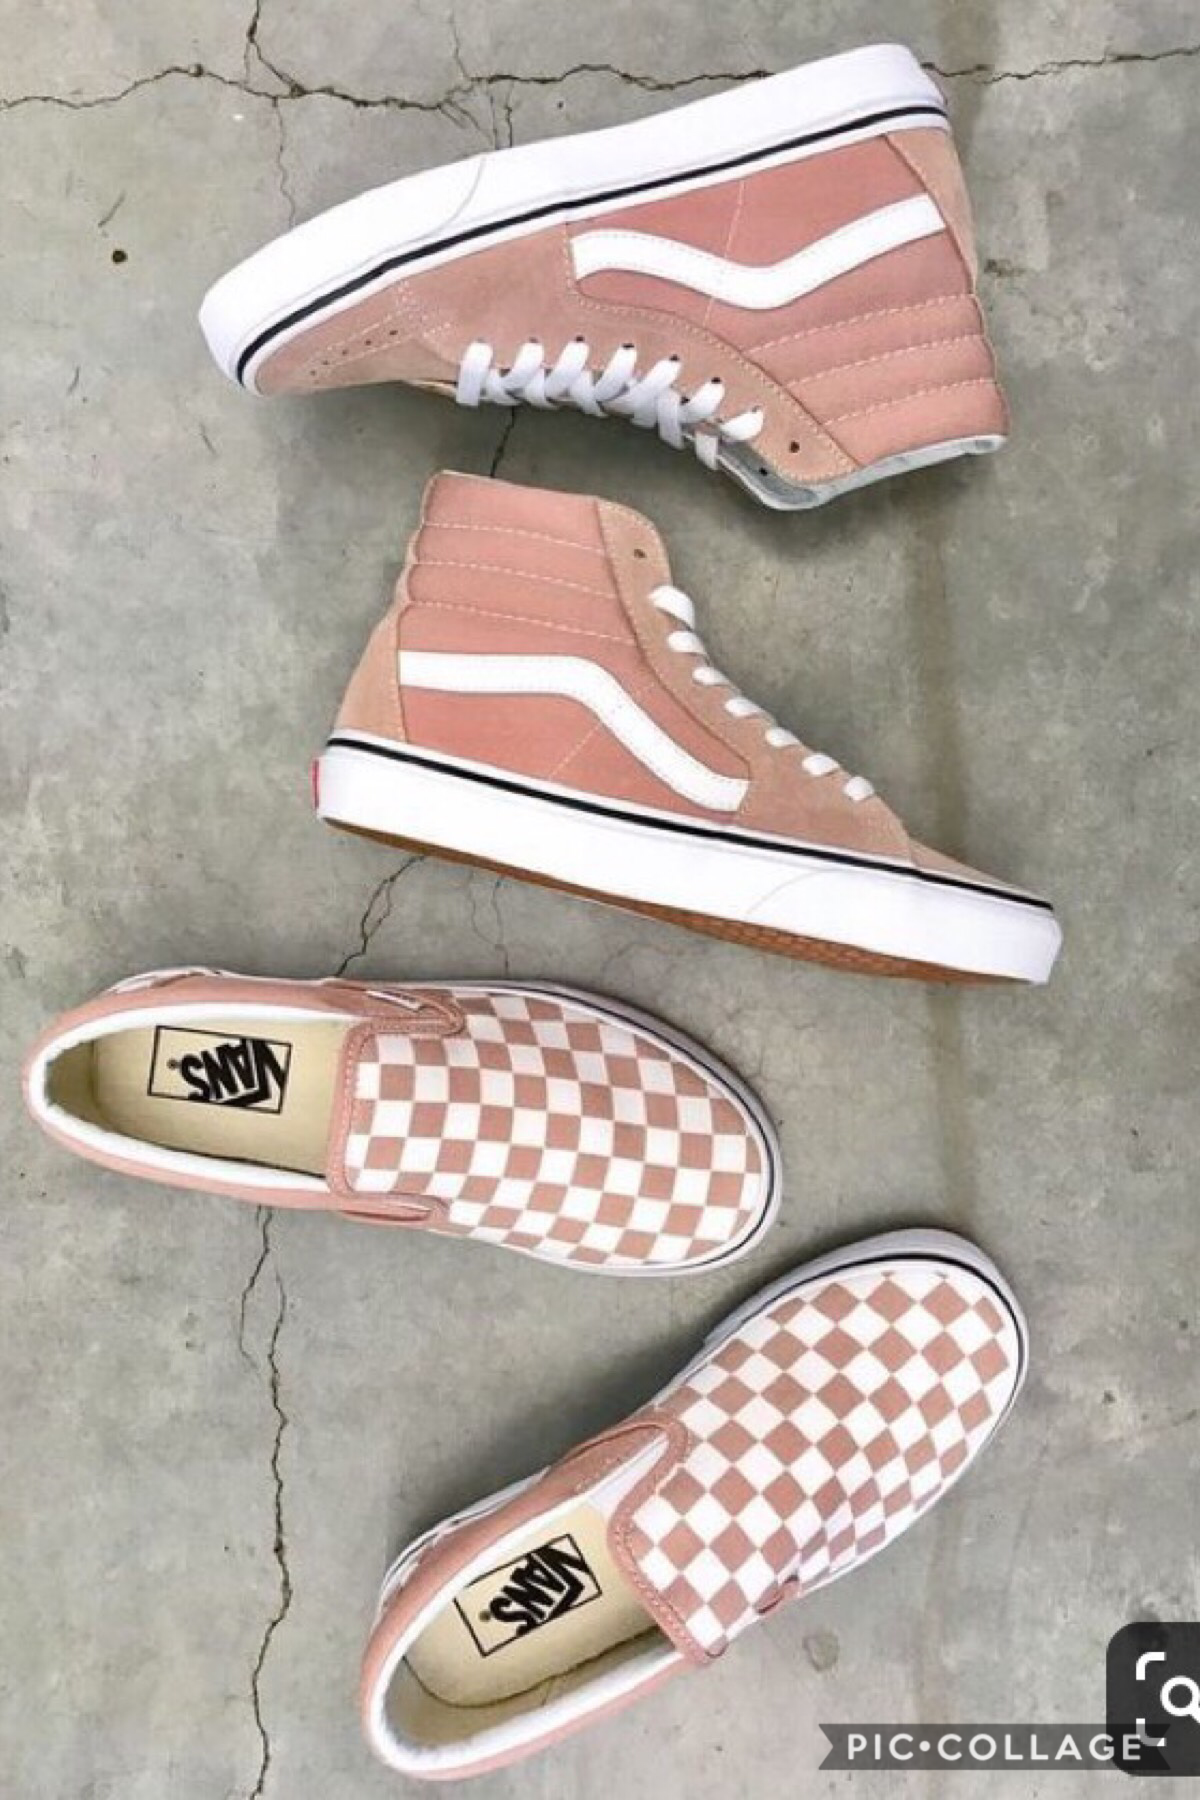 Blush Vans for the win😍
5-6-19